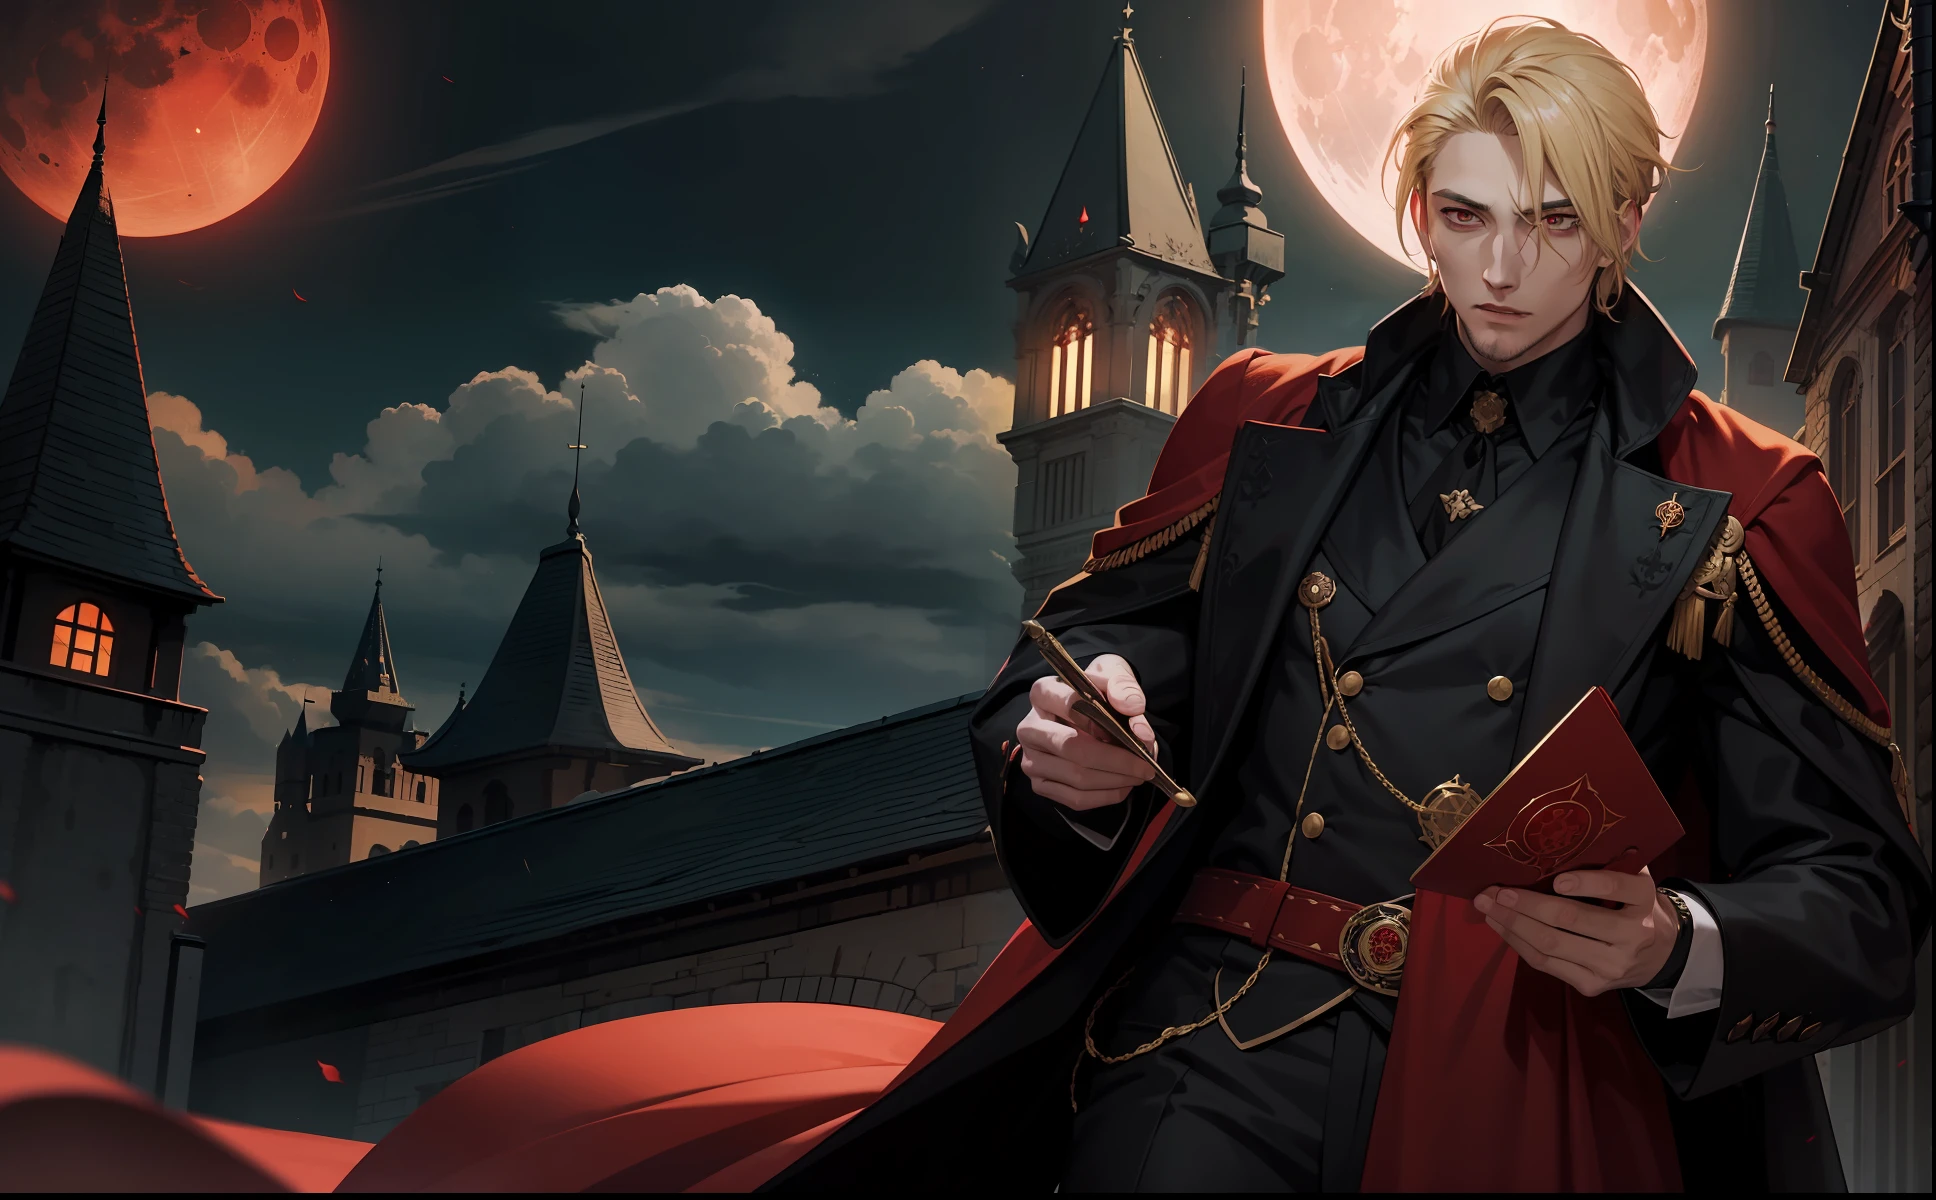 A 29-year-old man, a vampire king with blonde hair and red eyes, he wears a brown robe and black outfit with red. (Senarius a bloody moon night in a royal castle)